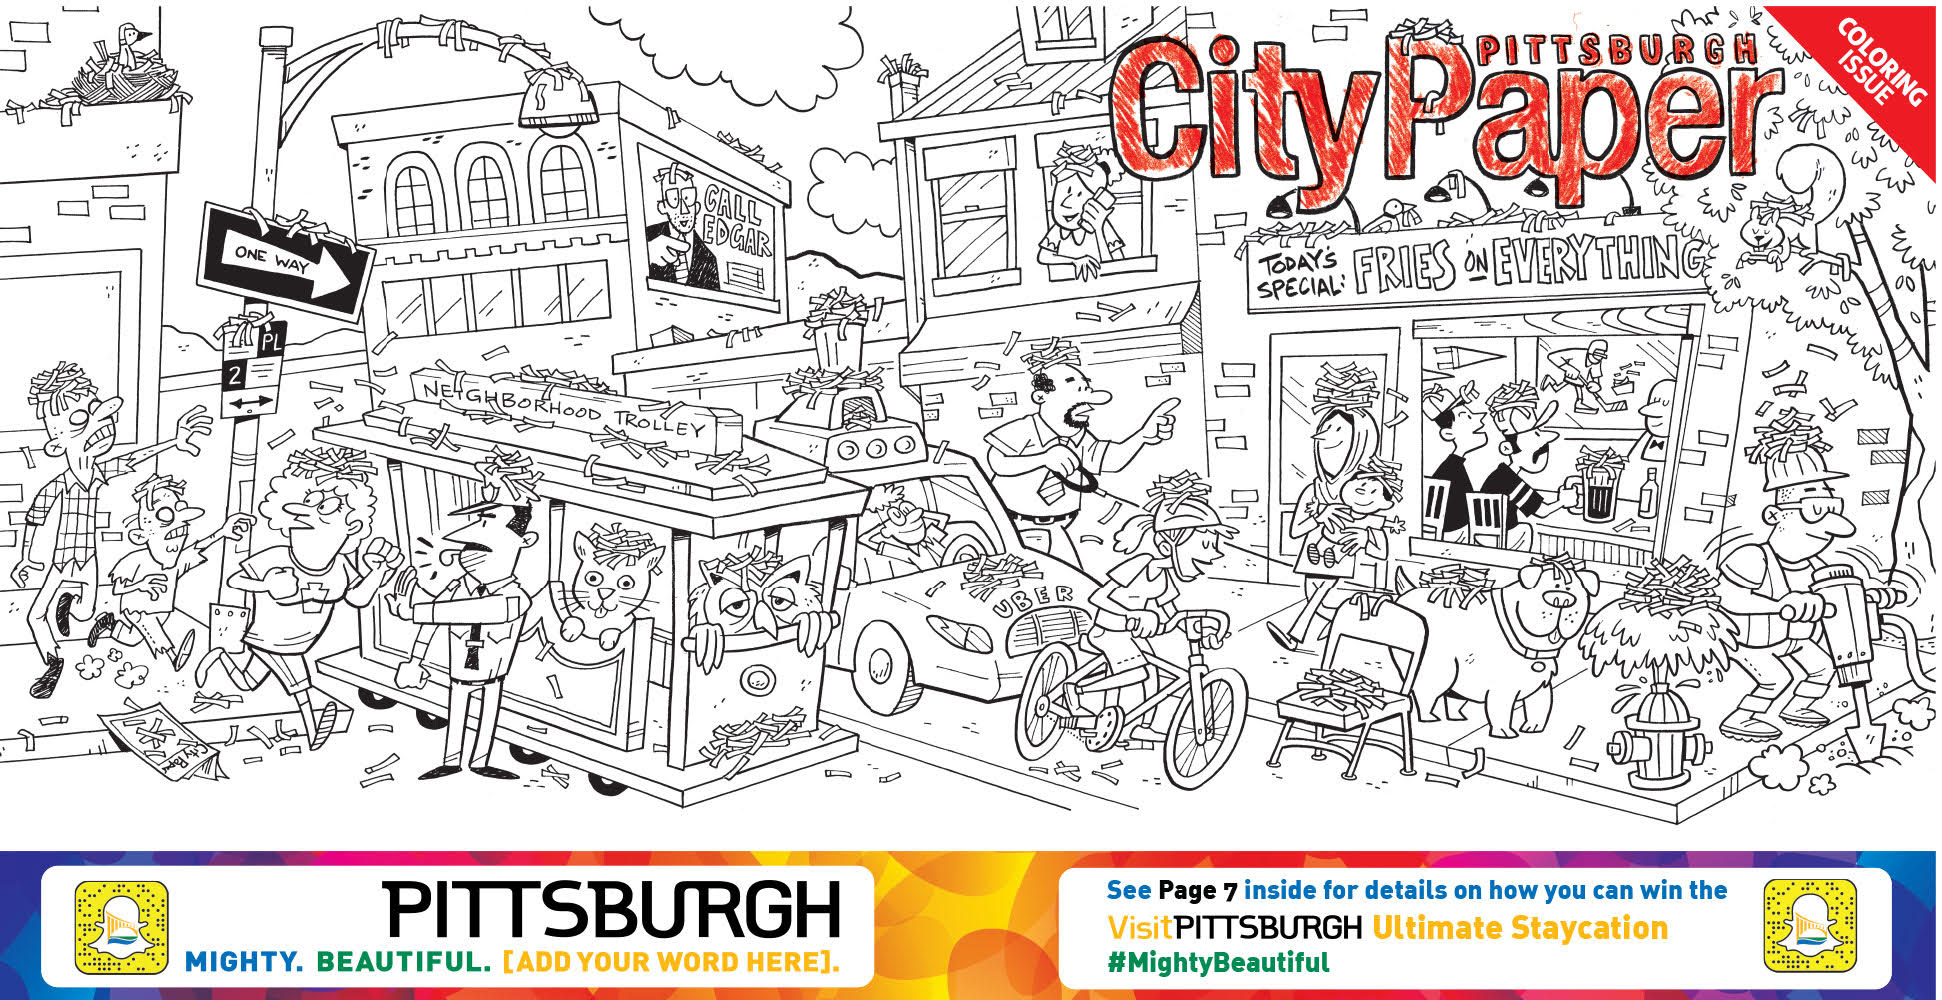 Pgh City Paper Presents: Best Of Pittsburgh Party - SOLD OUT!